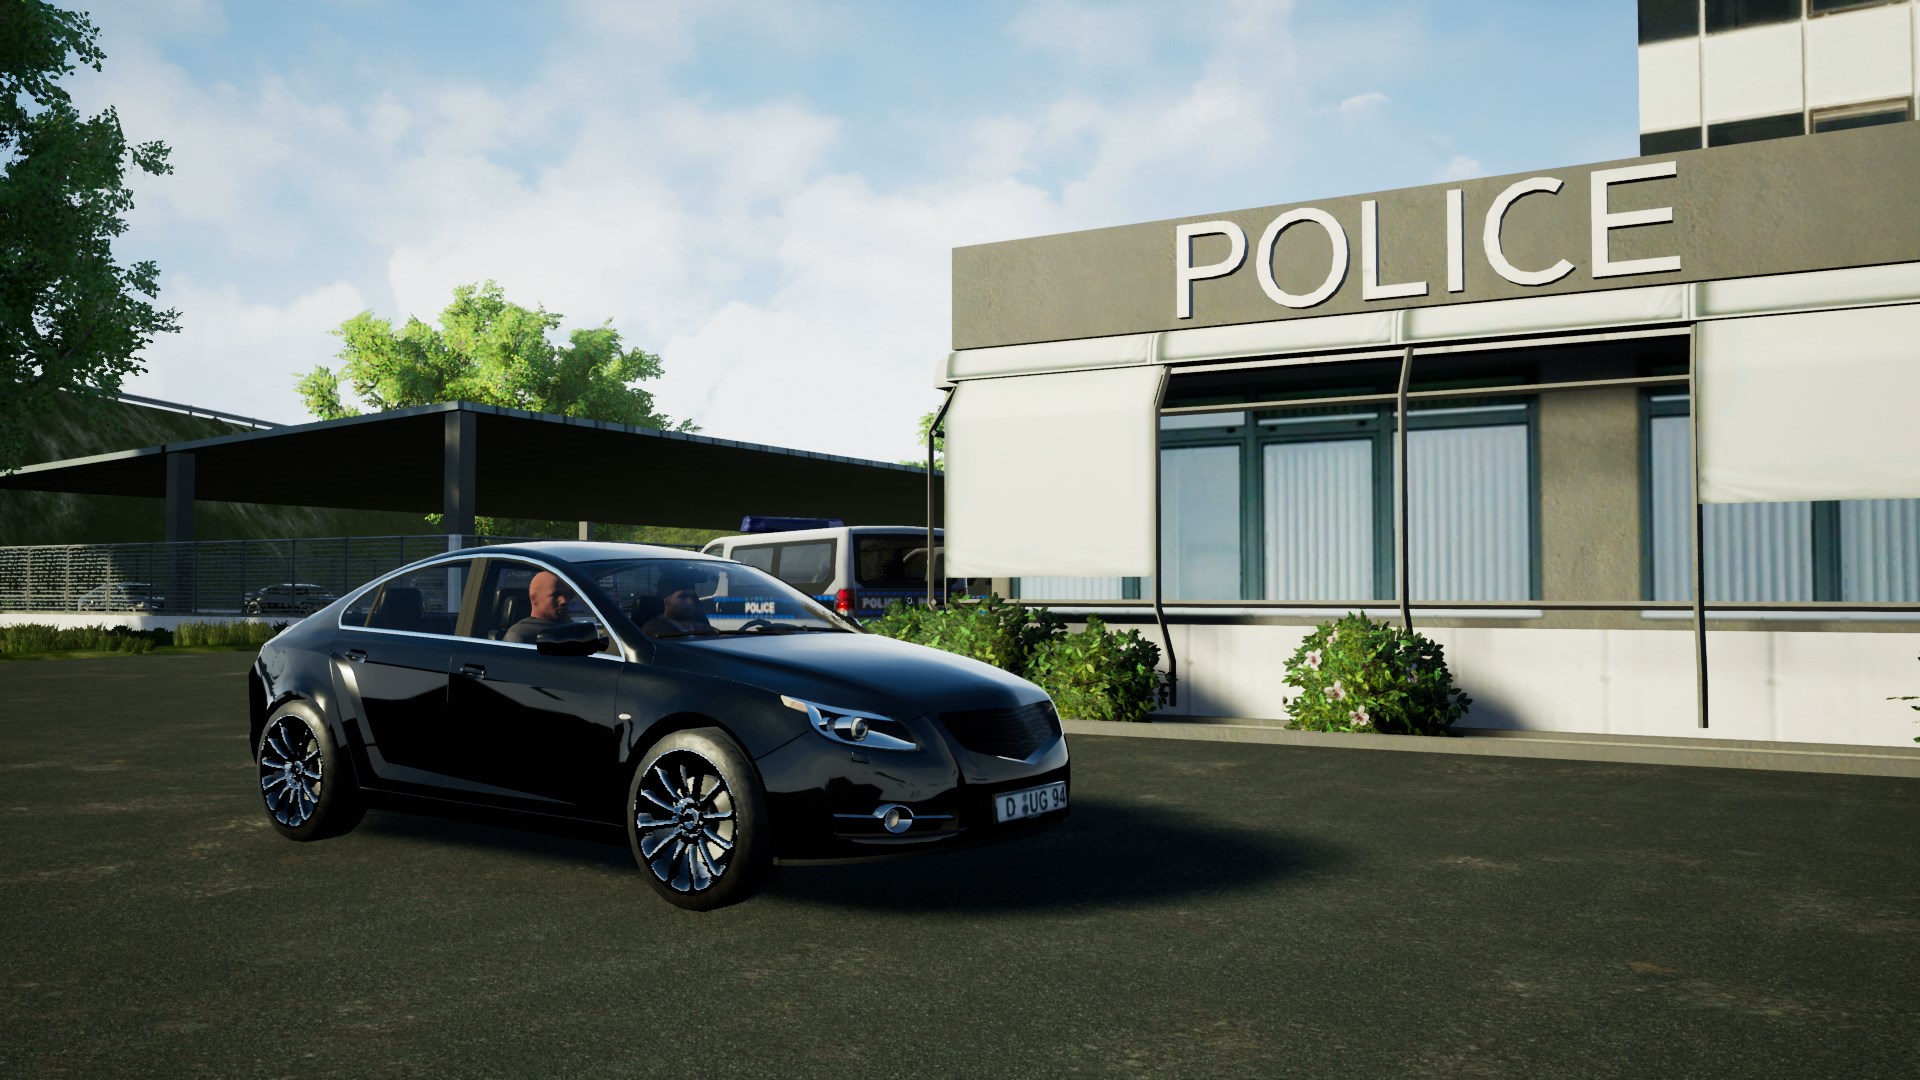 police video games xbox one